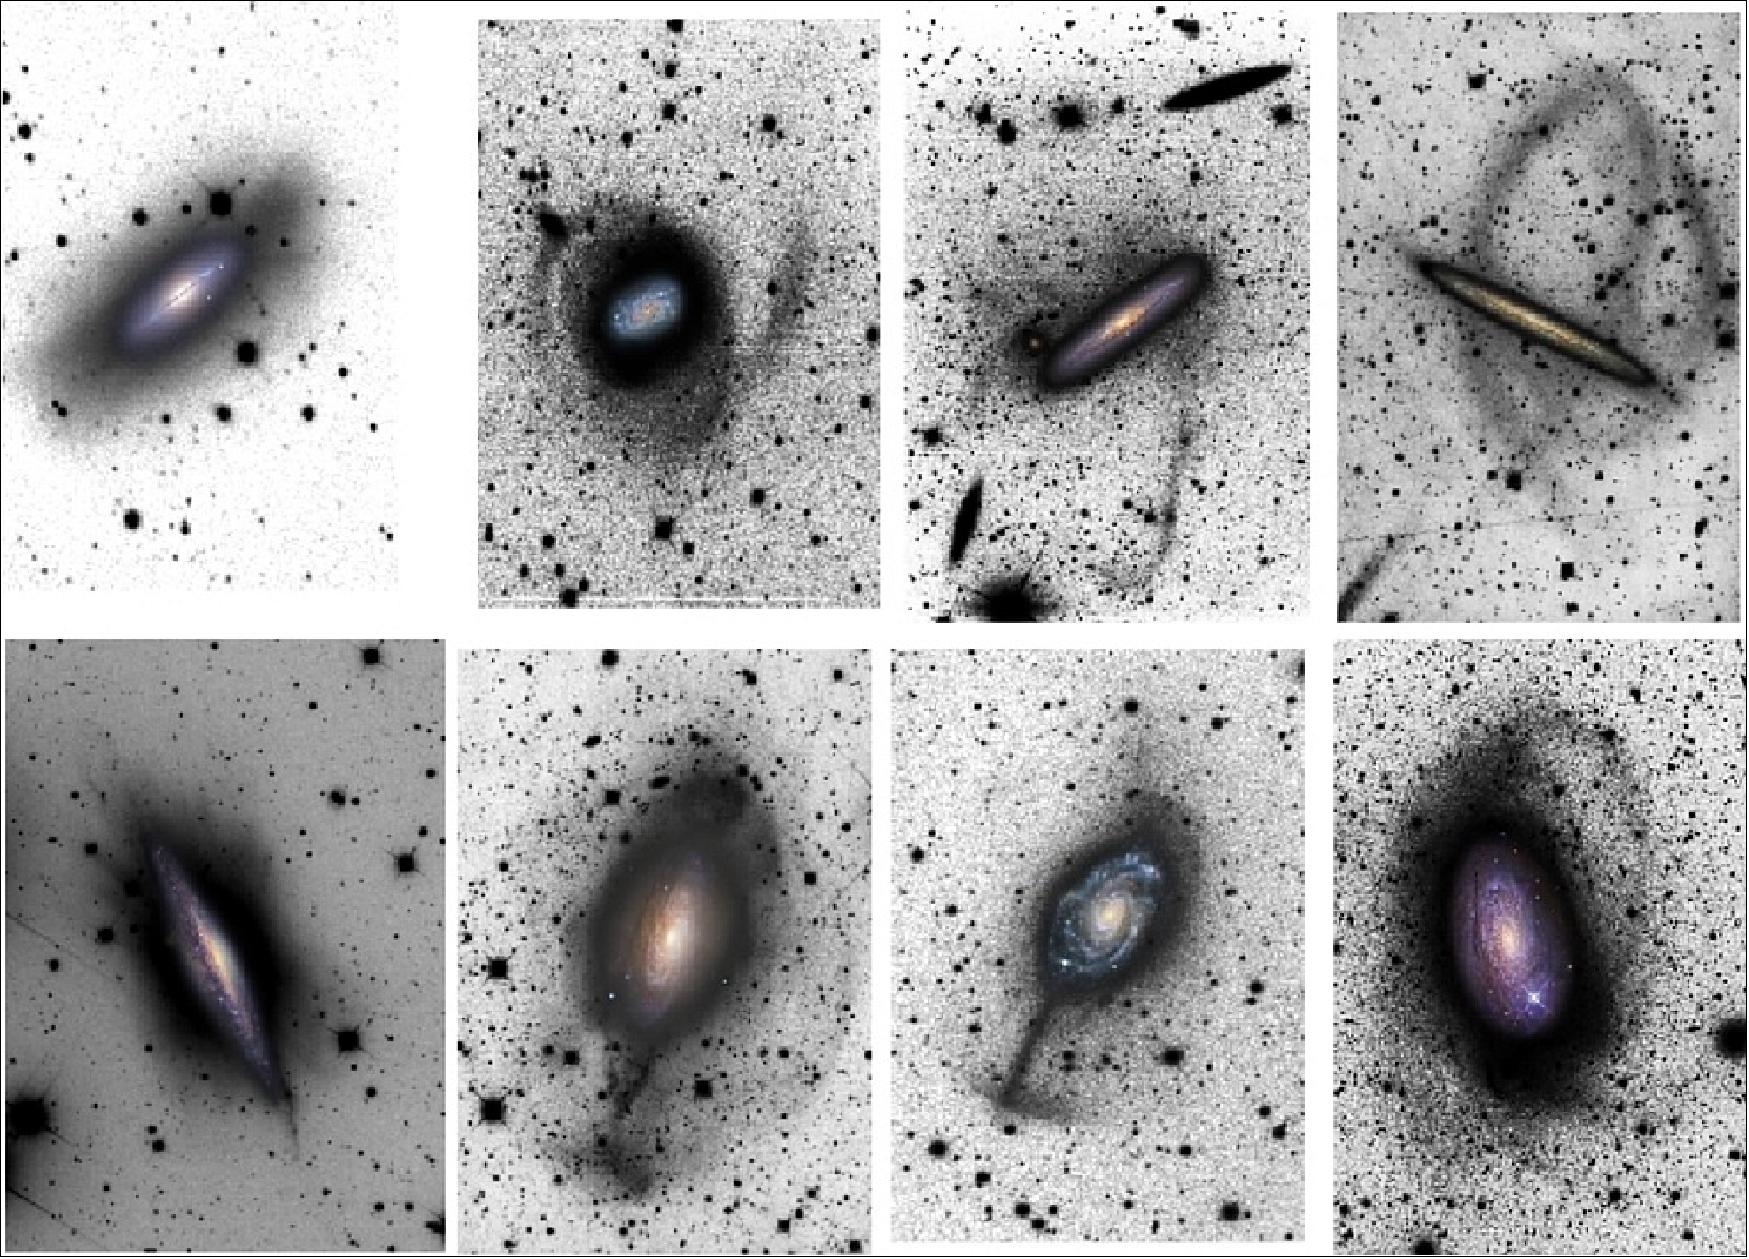 Figure 7: This series of images shows how astronomers find stellar streams by reversing the light and dark, similar to negative images. Color images of each of the nearby galaxies featured are included for context. Galaxies are surrounded by enormous halos of hot gas sprinkled with sporadic stars, seen as the shadowy regions that encase each galaxy here. Roman could improve on these observations by resolving individual stars to understand each stream’s stellar populations and see stellar streams of various sizes in even more galaxies [image credits: Carlin et al. (2016), based on images from Martínez-Delgado et al. (2008, 2010)]